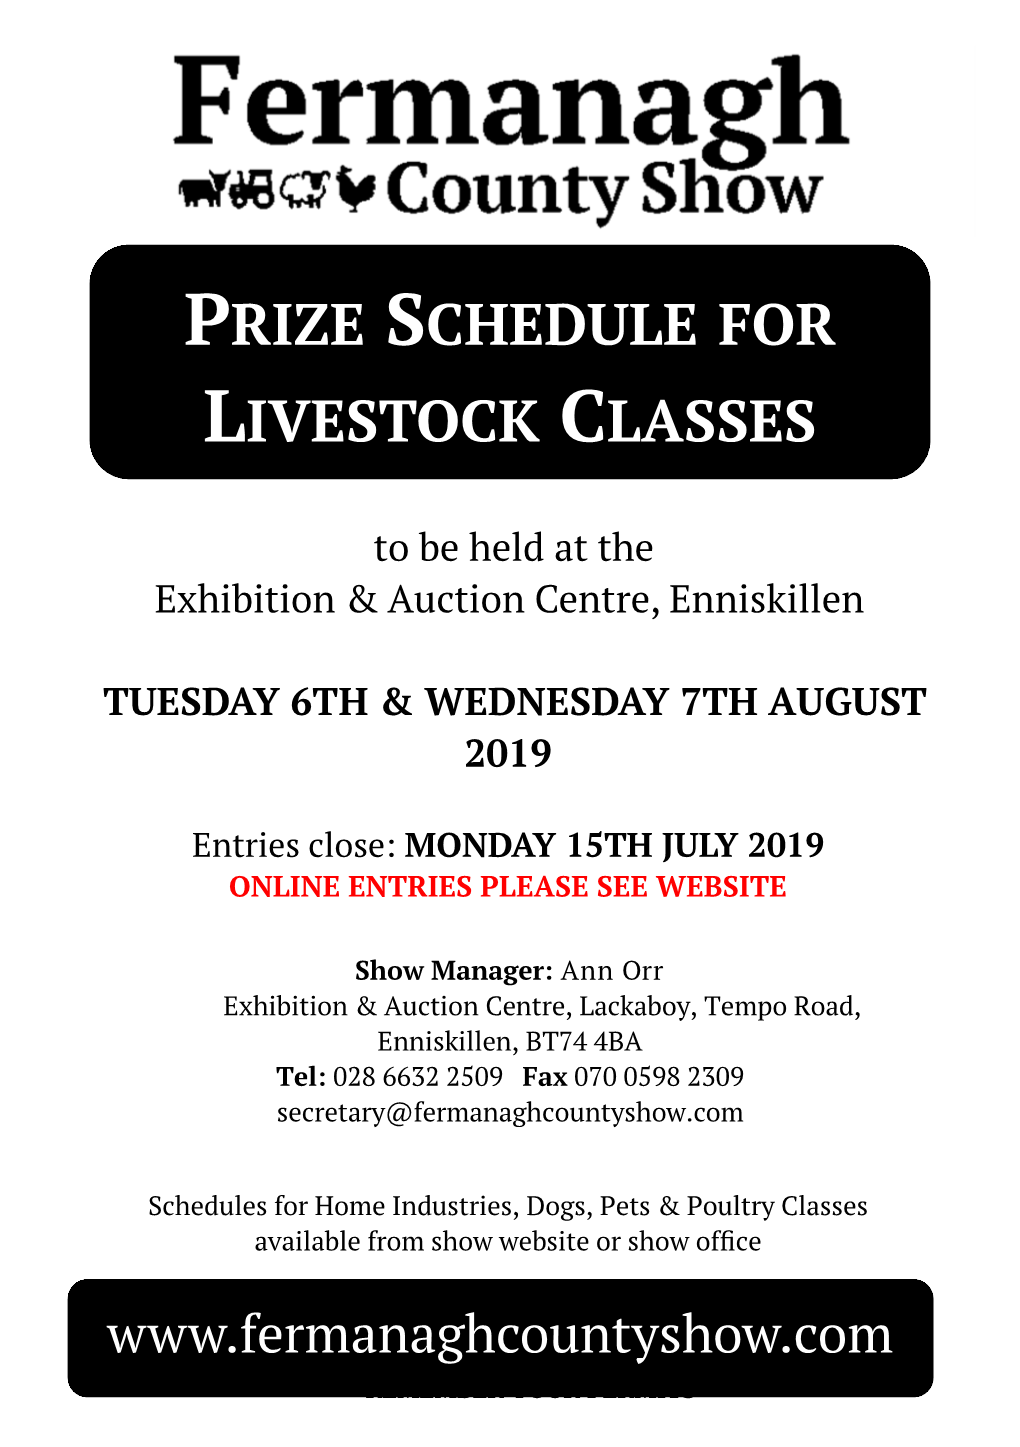 Prize Schedule for Livestock Classes